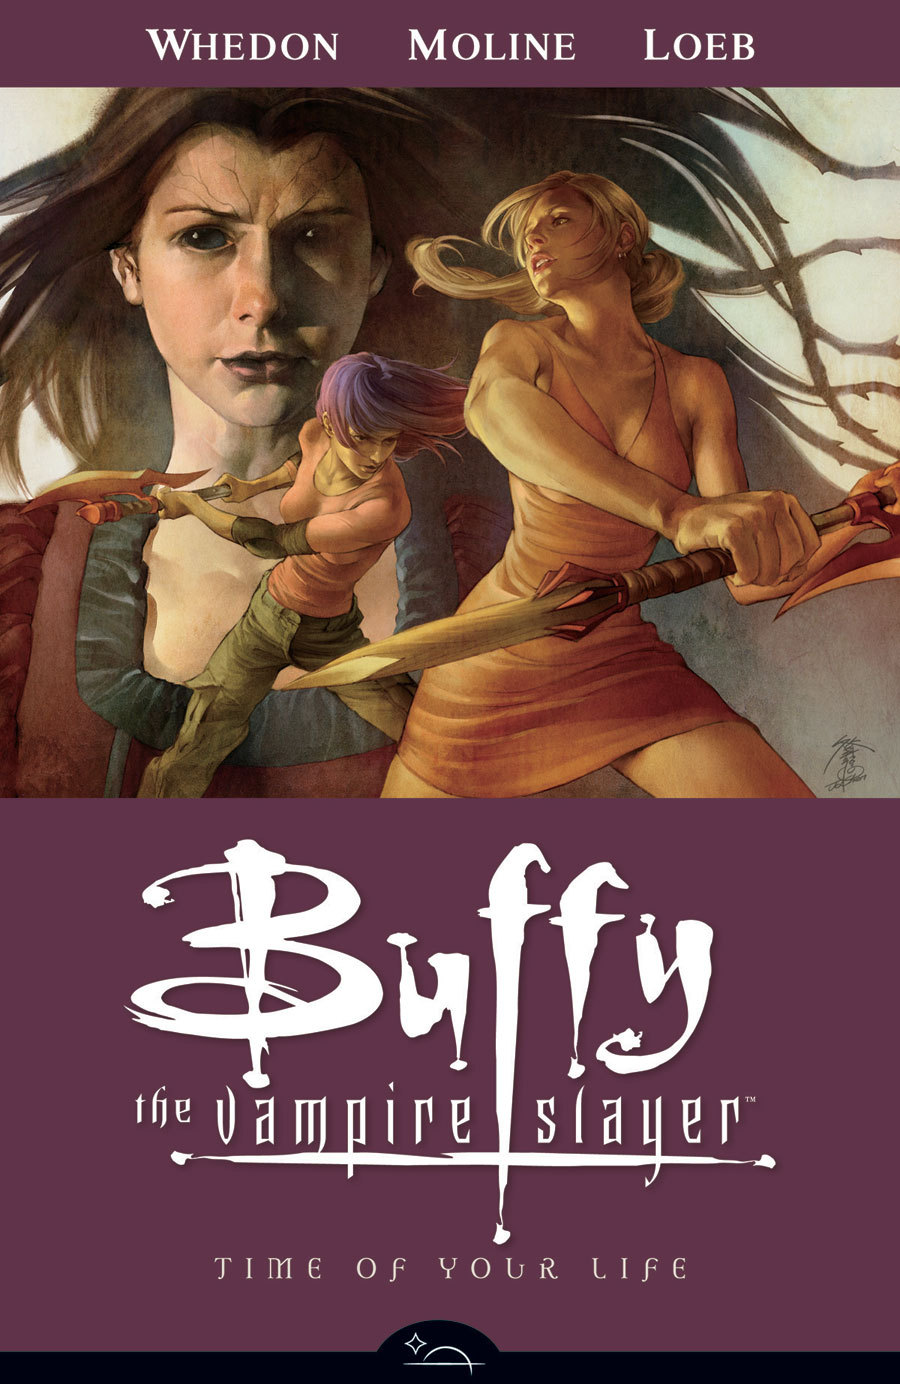 Started and finished #reading: Buffy the Vampire Slayer, Season 8, Vol 4: Time of Your Life.
My favourite of the comic books so far, I think. The script is written by Joss Whedon, and it shows: a clever and complicated storyline (in which Buffy is...